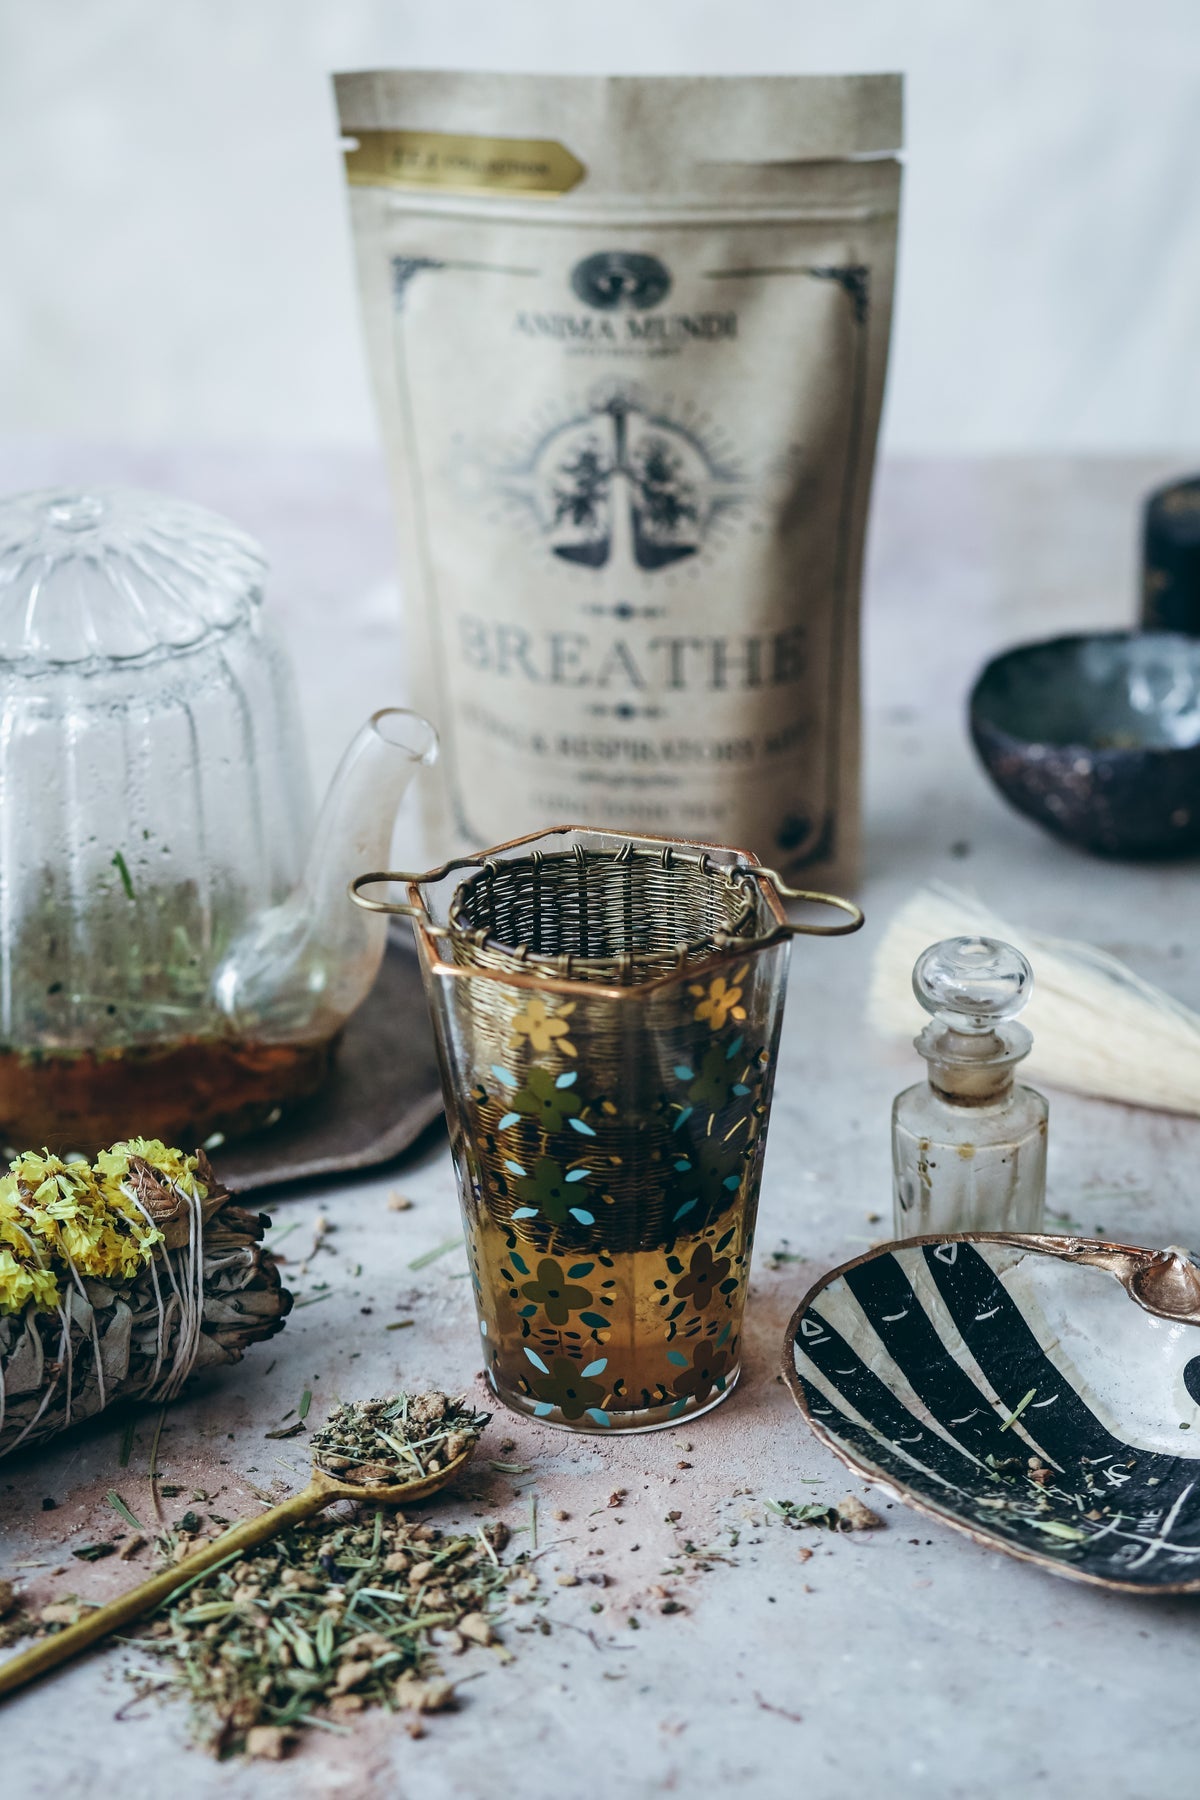 anima mundi breathe tea / Maintaining lung health is crucial due to the potentially damaging results of toxic fumes, or trauma due to the current world events. This herbal tea blend is packed with antioxidants & antimicrobial properties to support respiratory health.